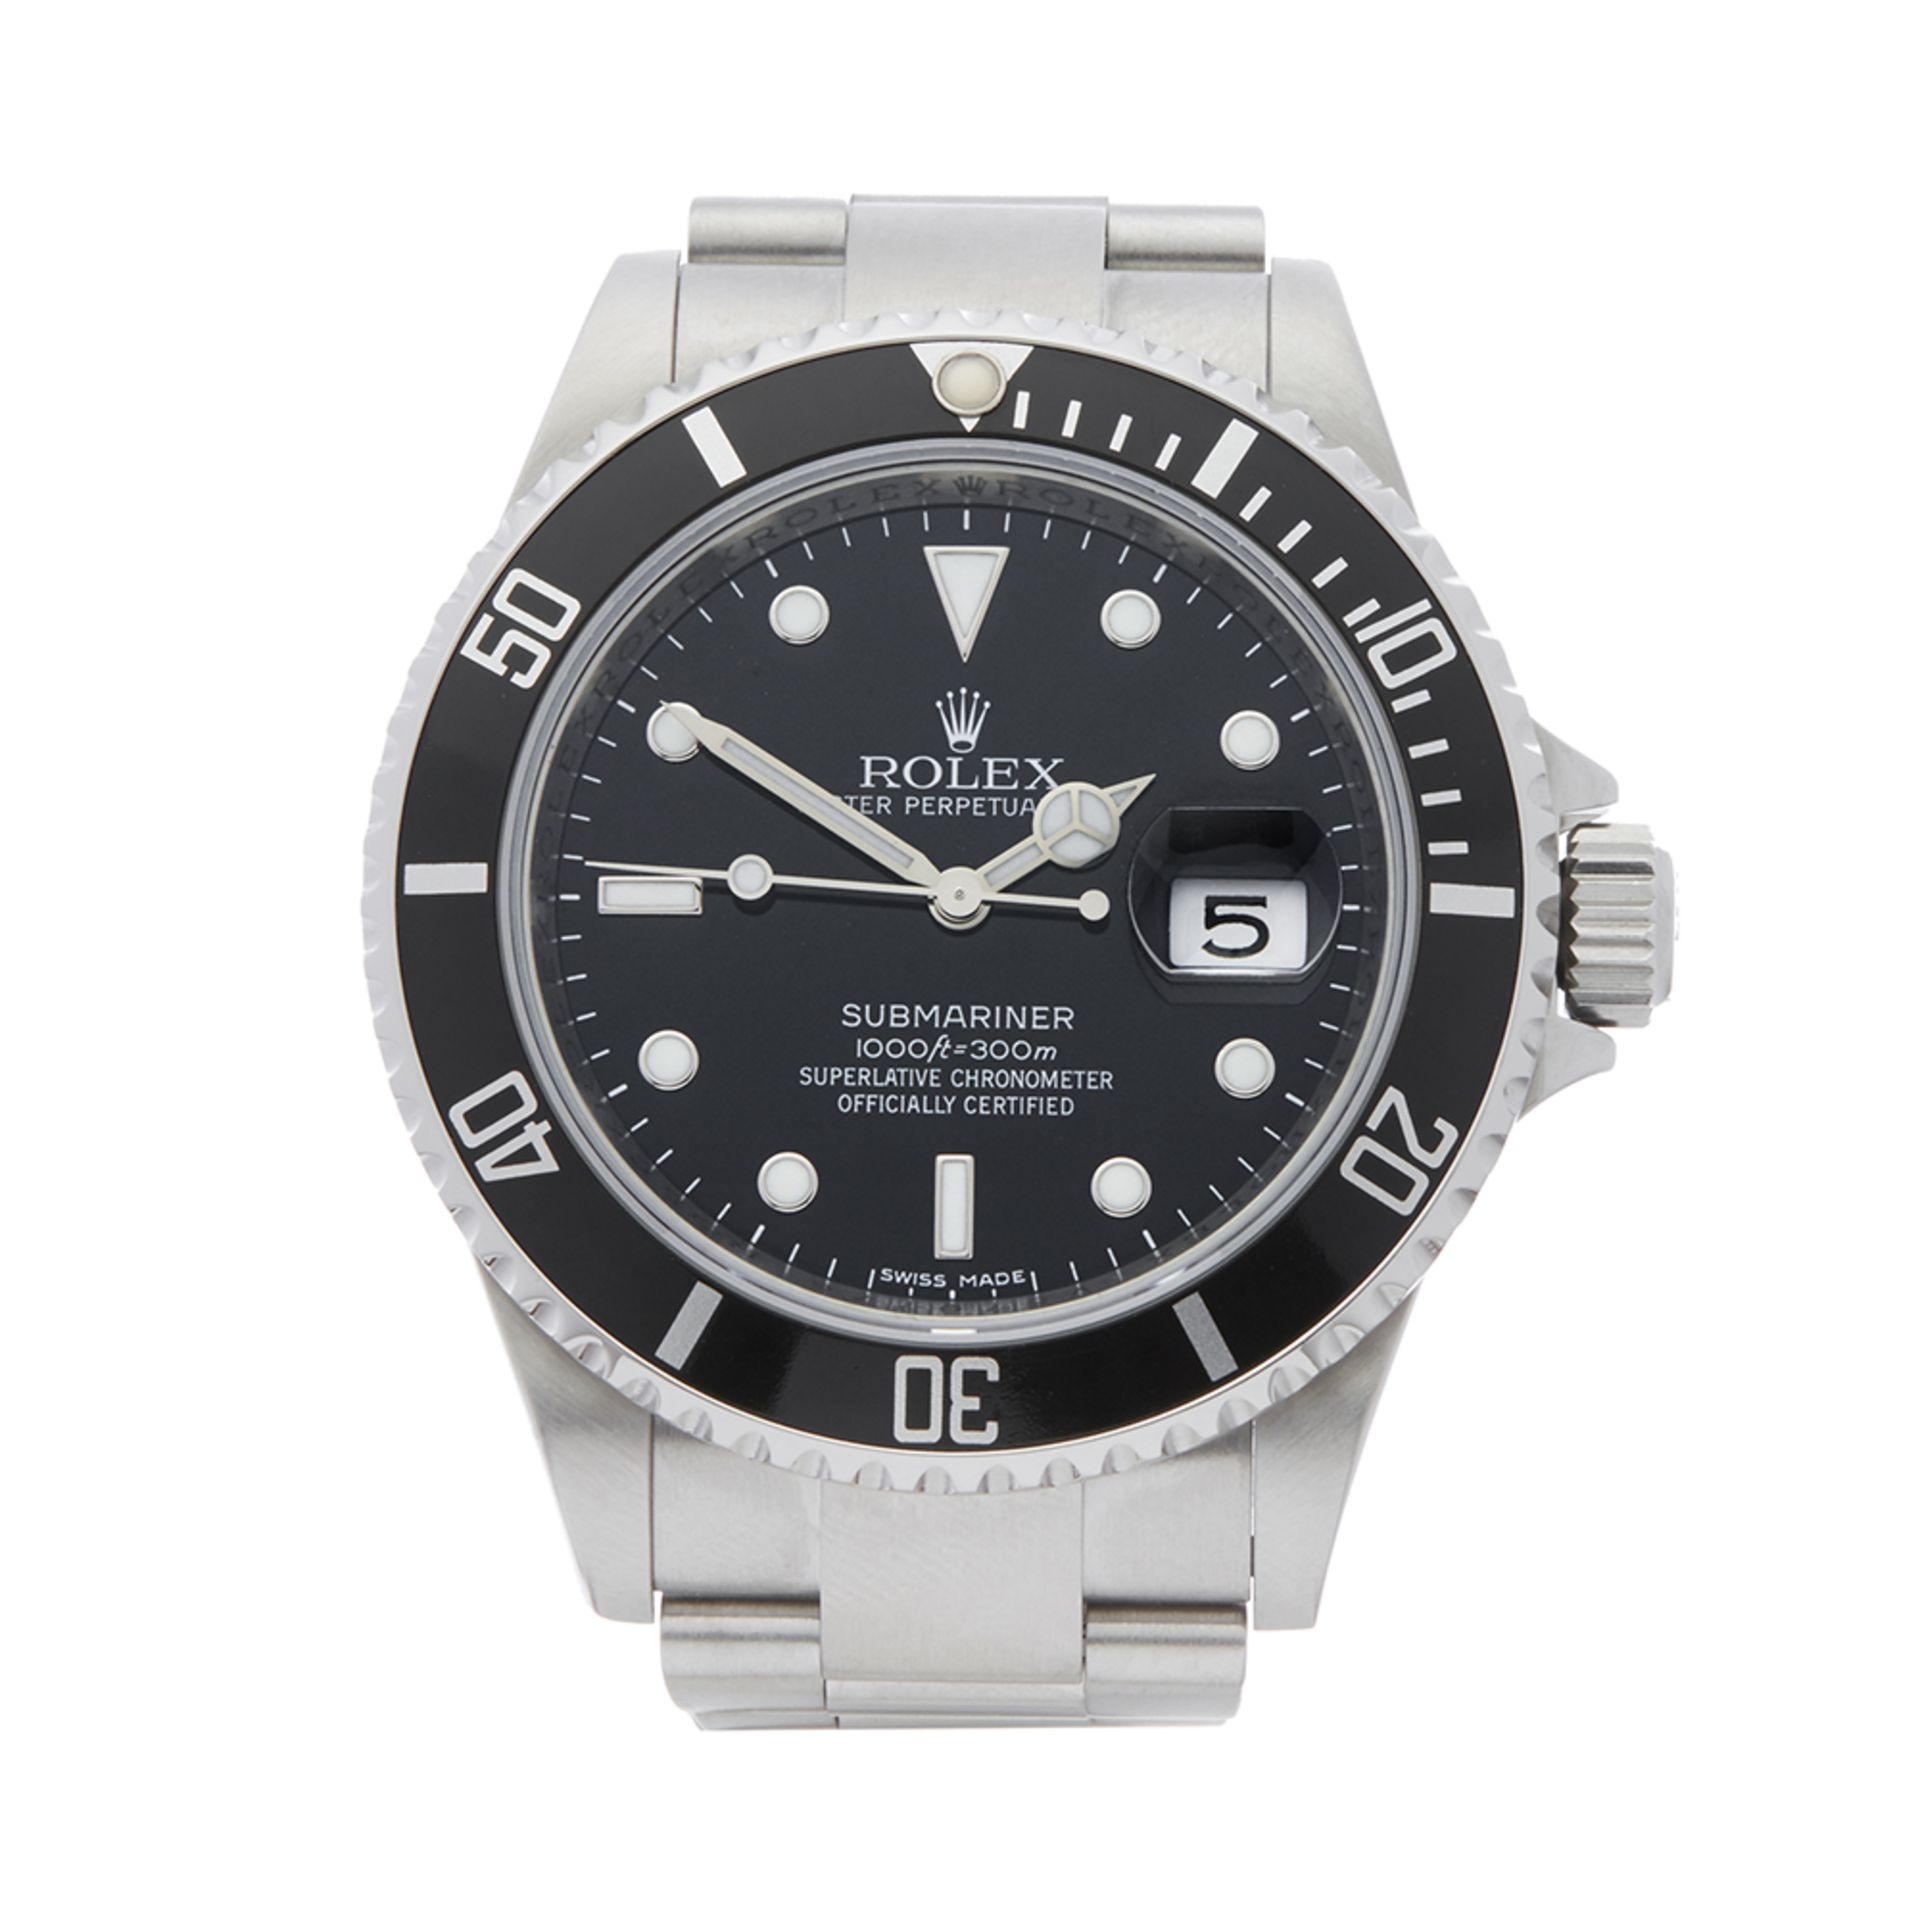 Rolex Submariner 40mm Stainless Steel - 16610LN - Image 2 of 8